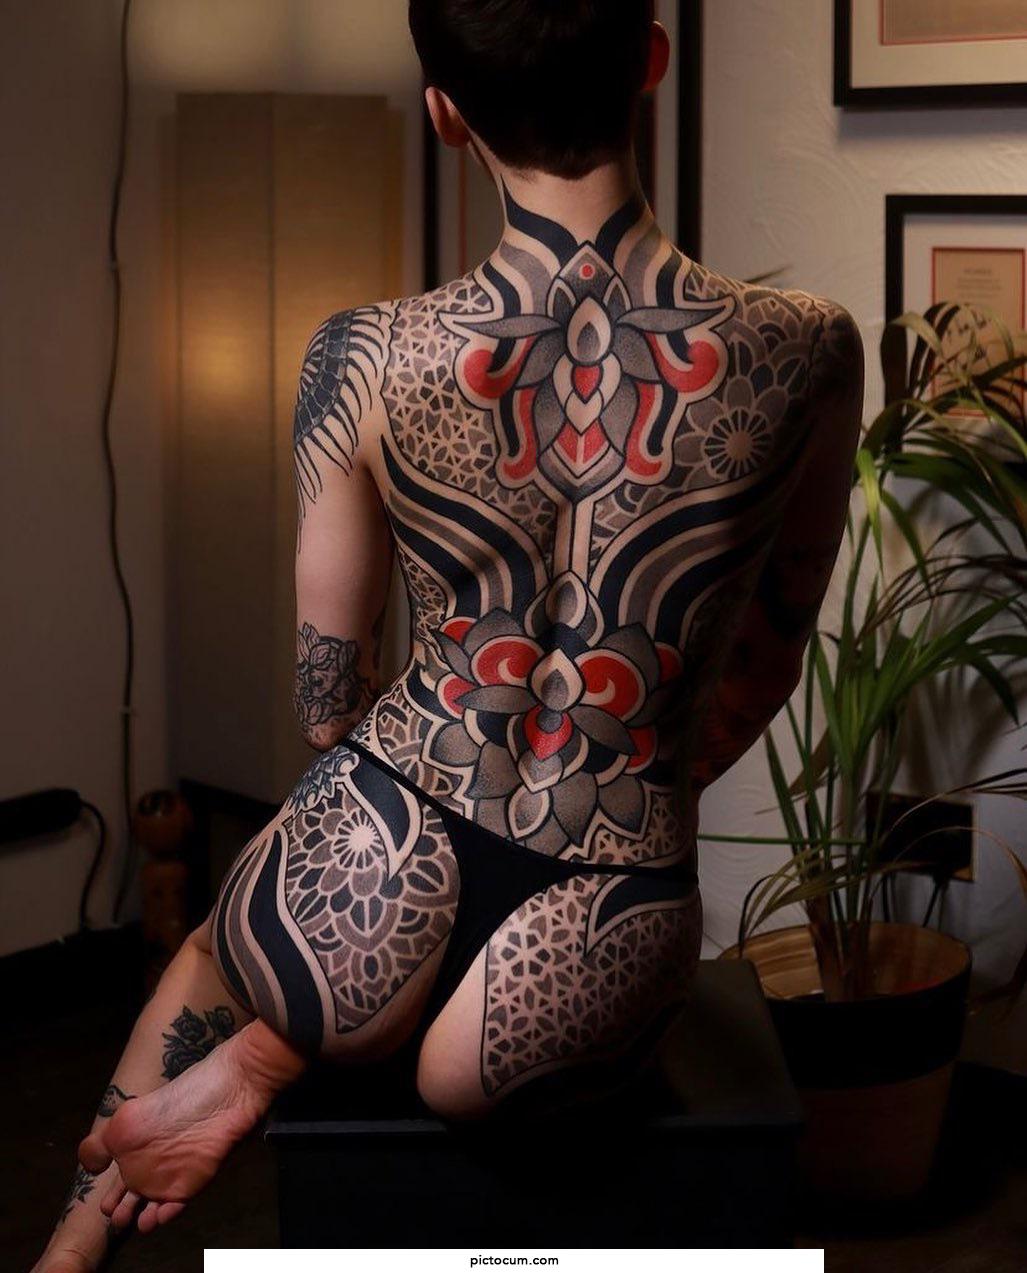 Her ink is amazing